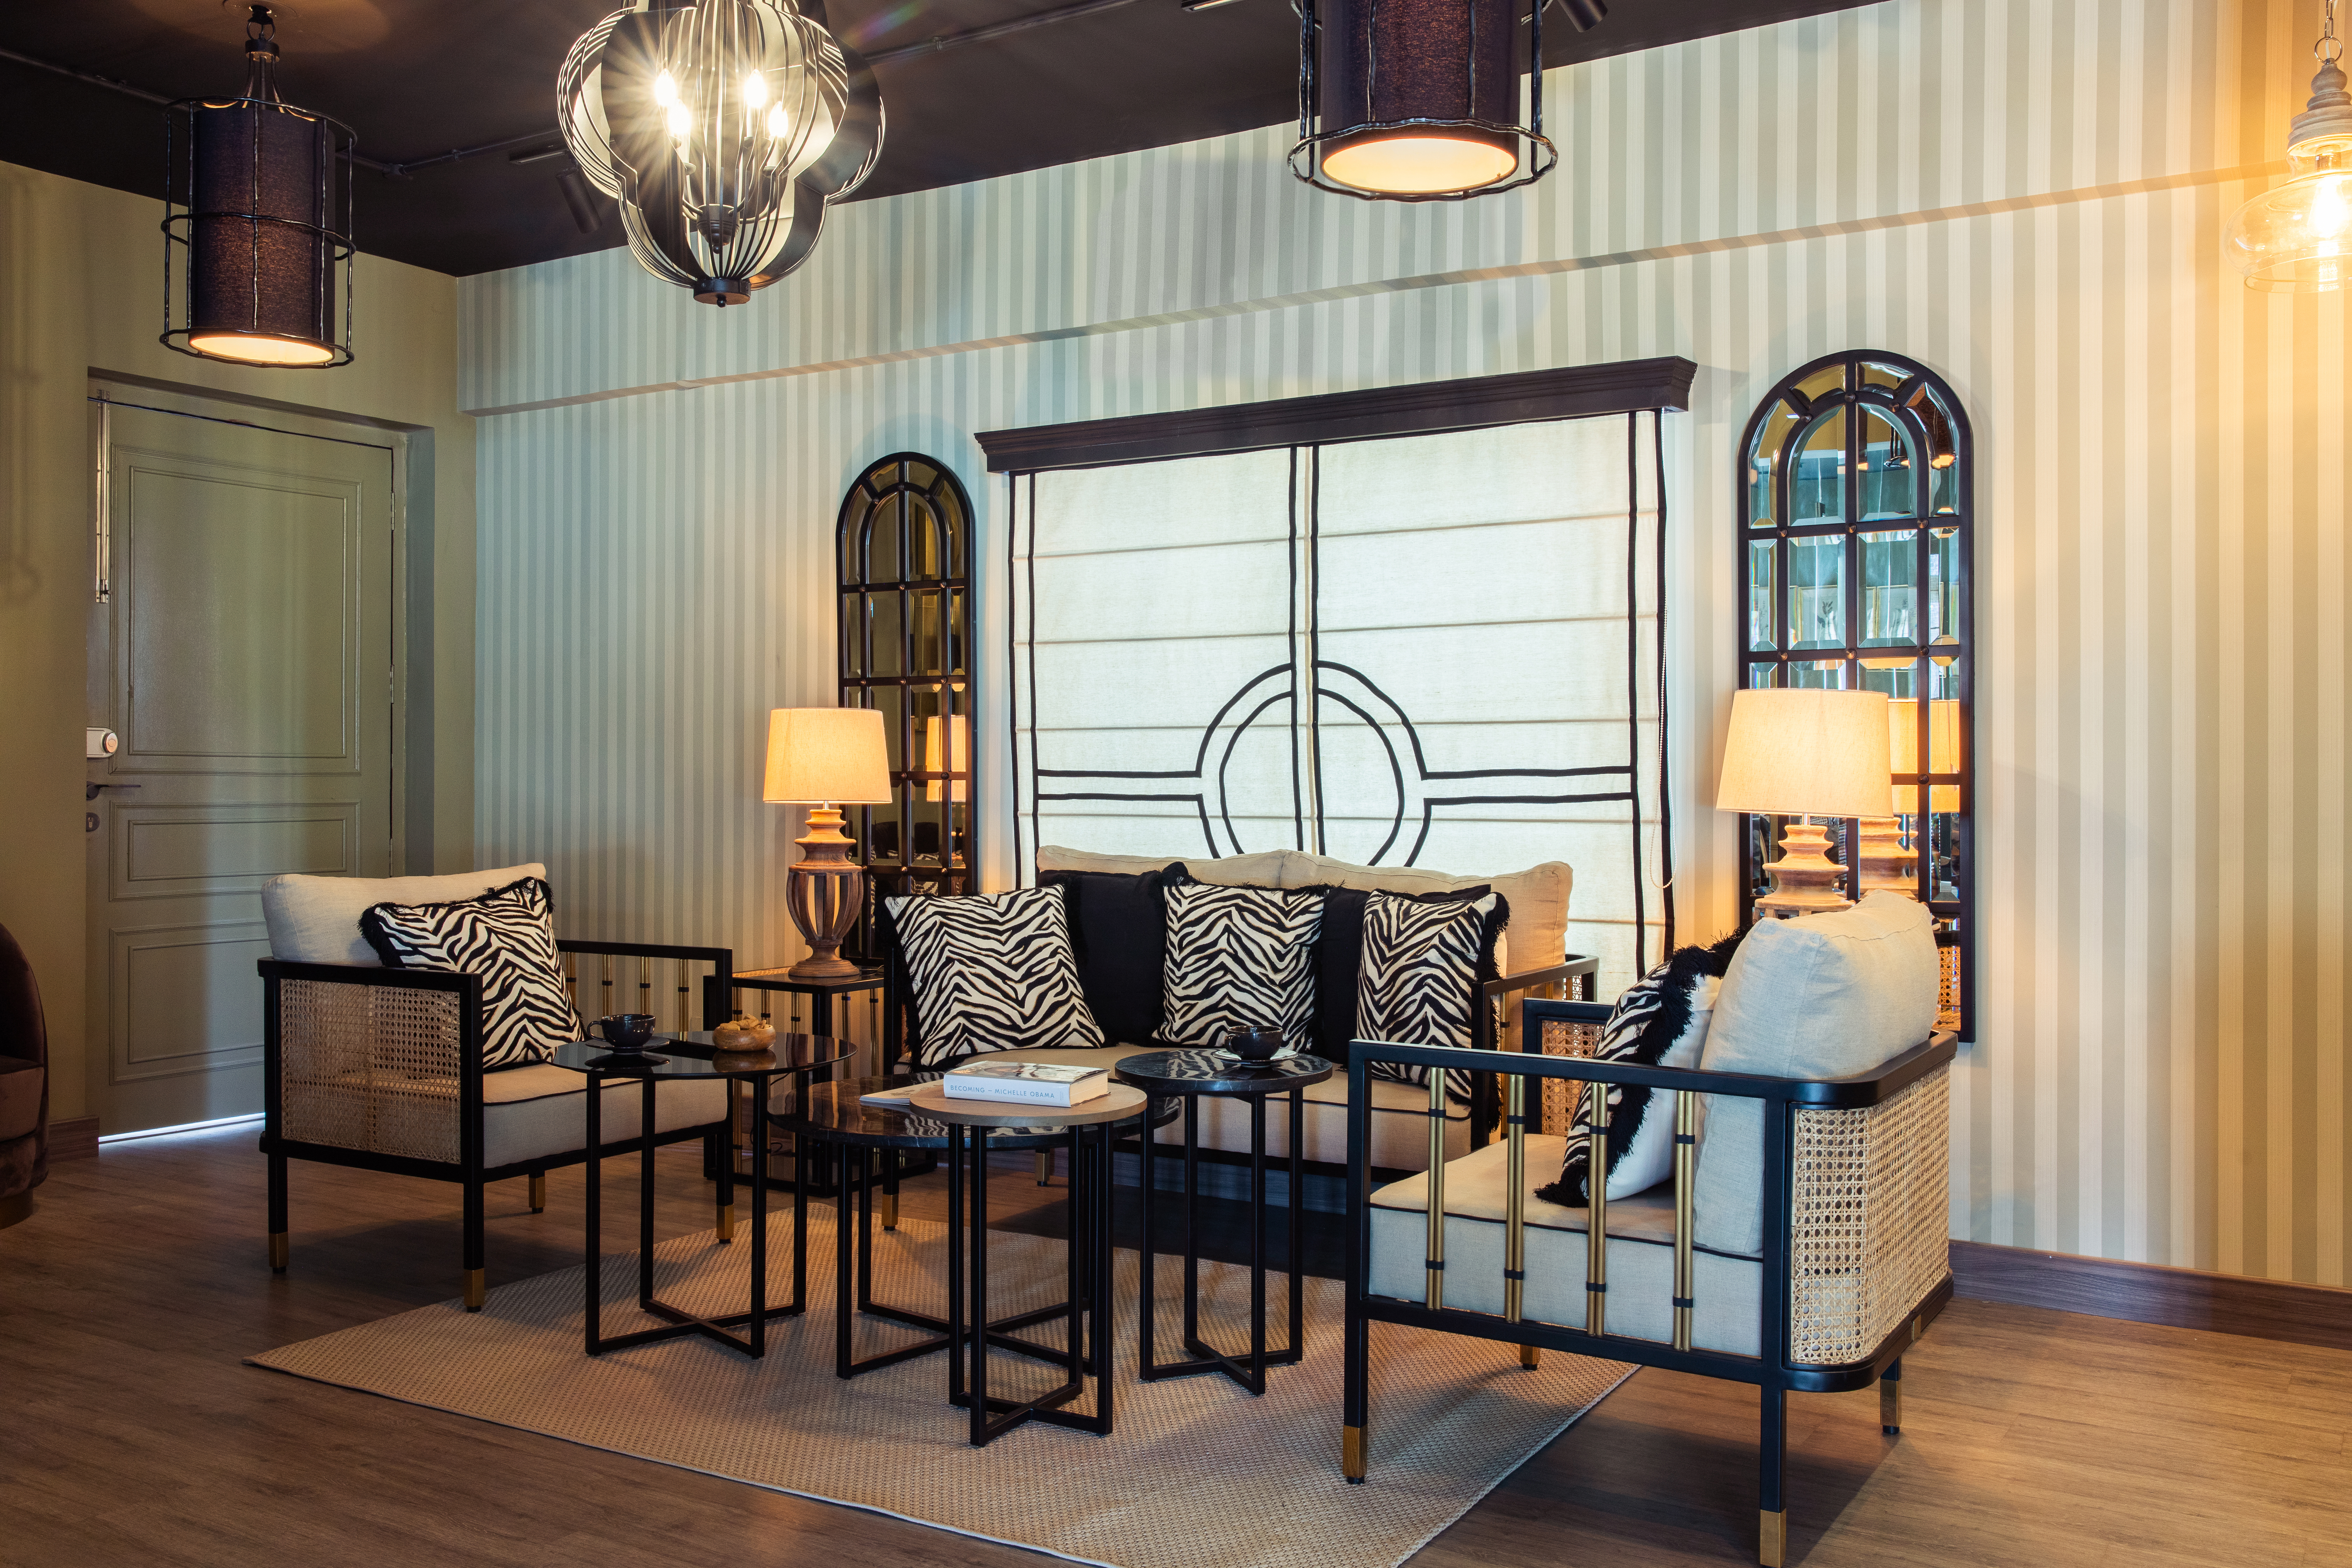 Sage Living reveals exclusive Malacca Collection in tailor-made style